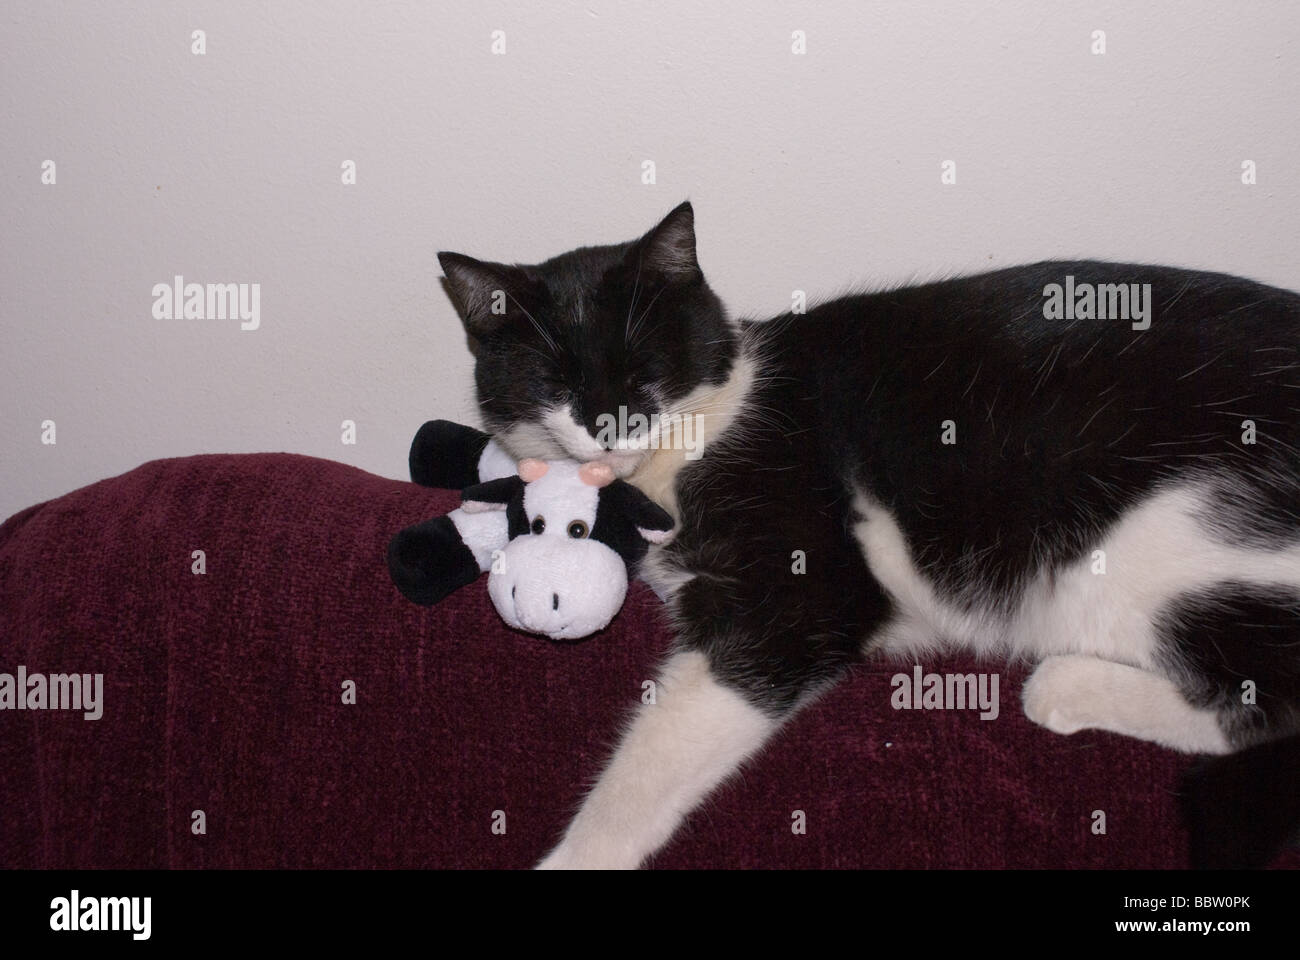 This is a photo of my cat, fast asleep with a toy. Stock Photo